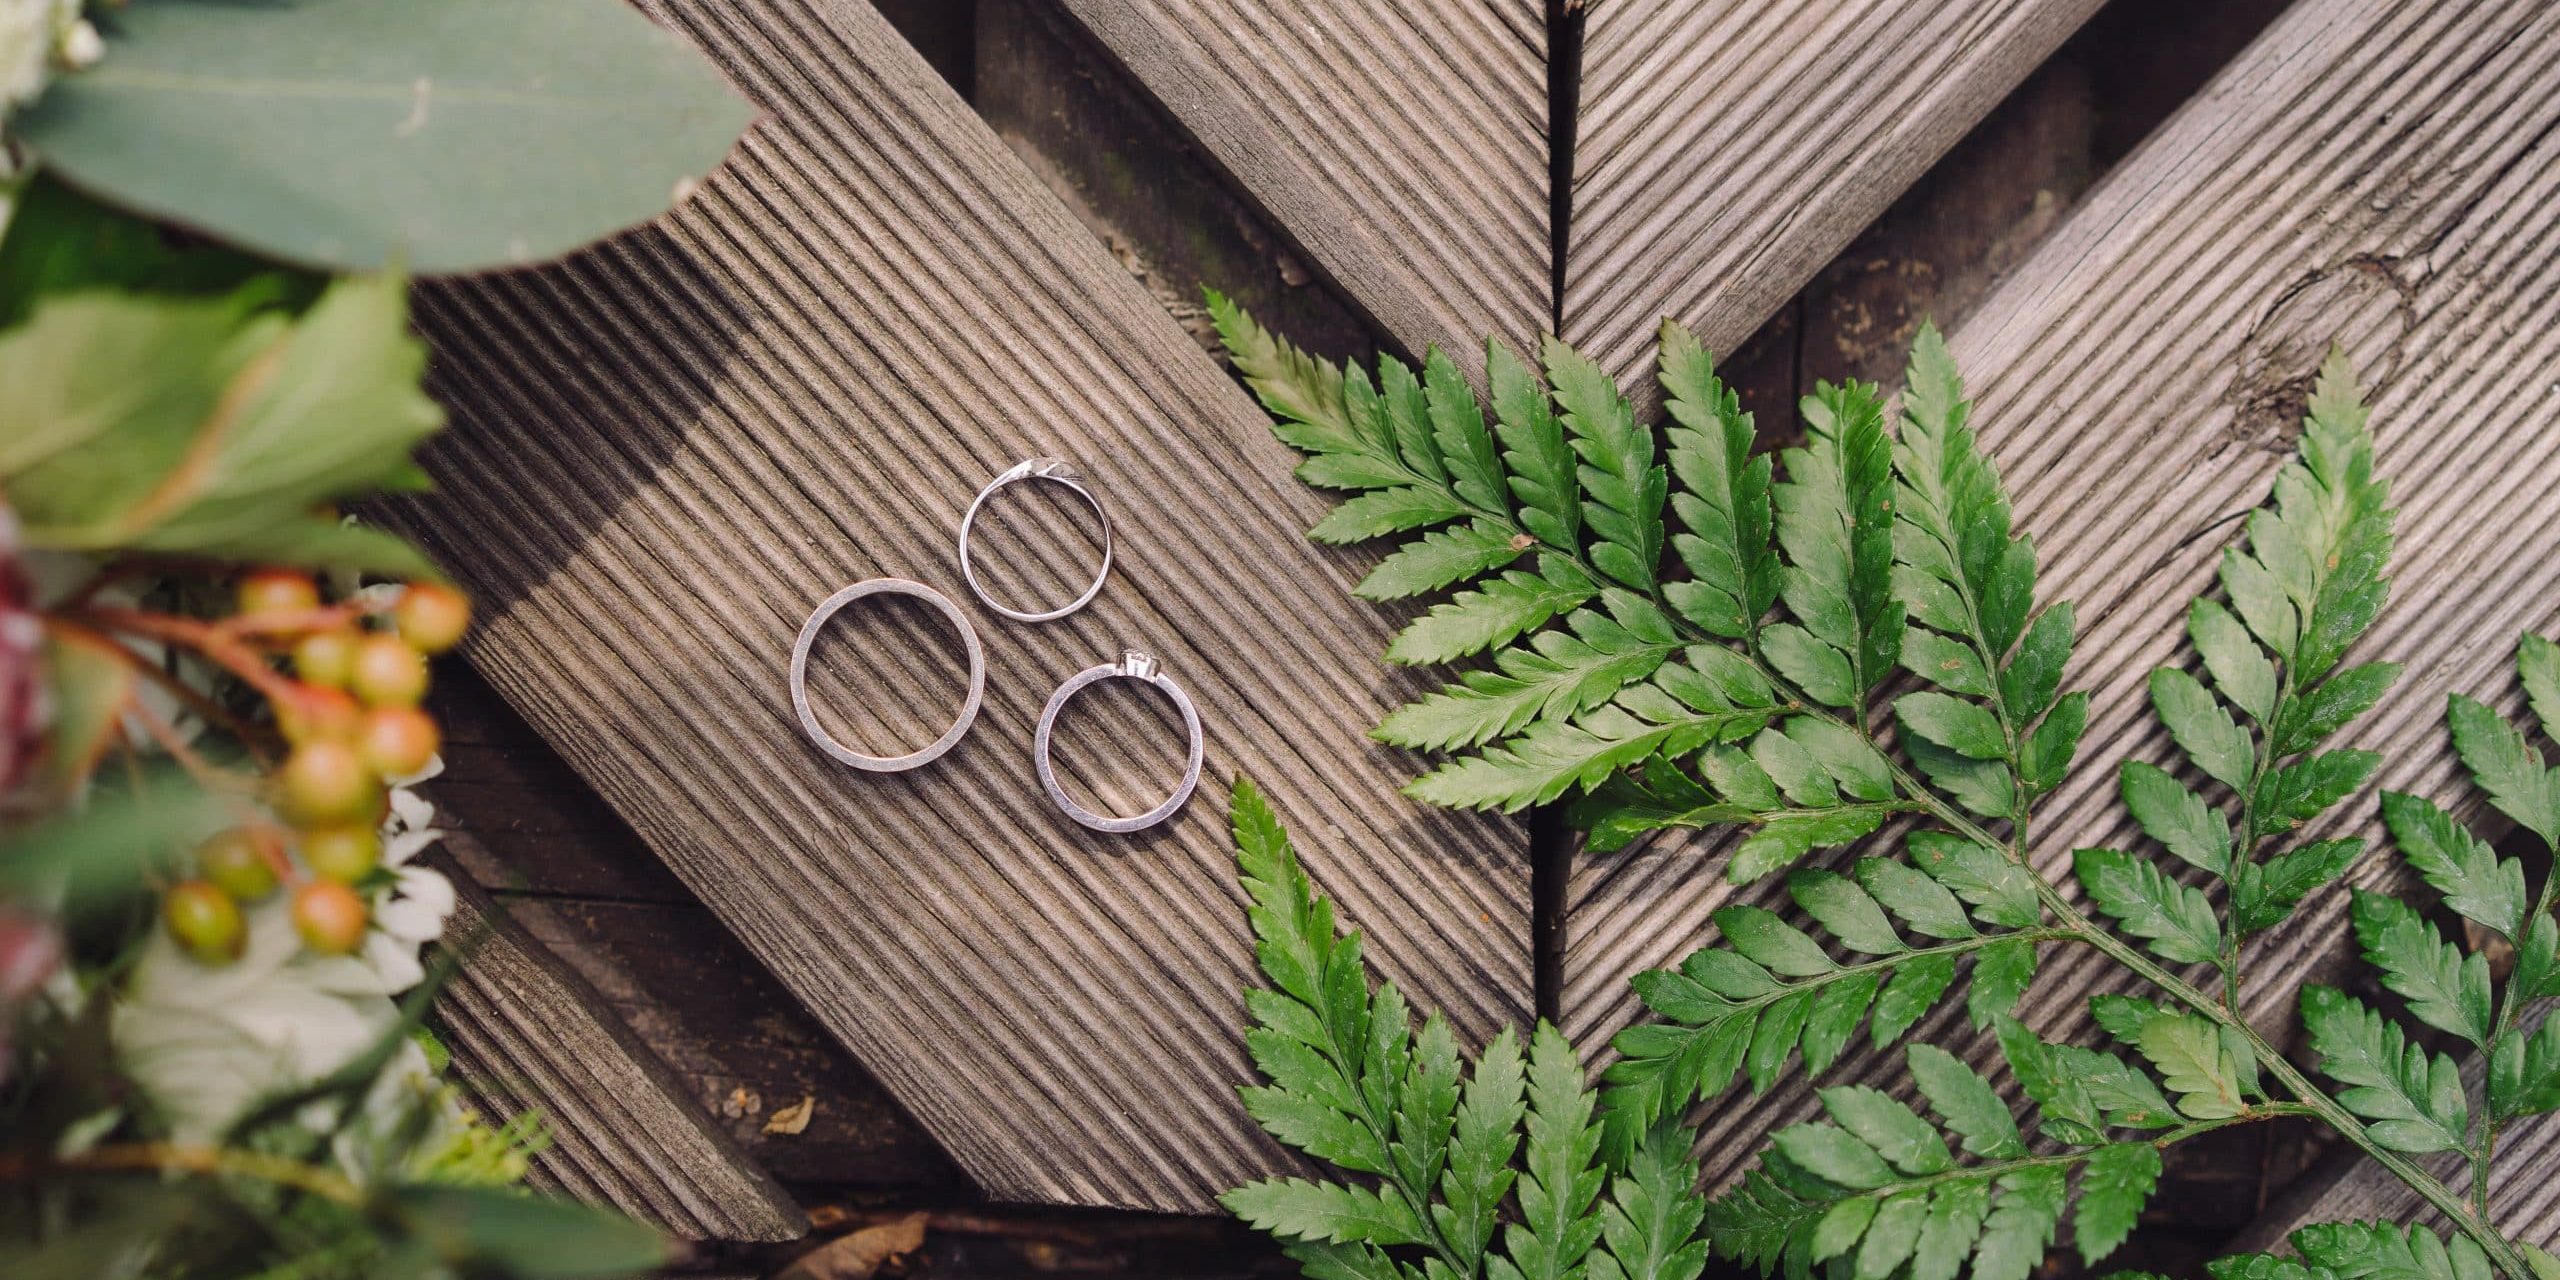 Botanic bridal chic. Bouquet, wedding rings and engagement ring on wooden background with greenery and fern leaves. Copy space, top view, flat lay. Rustic composition.